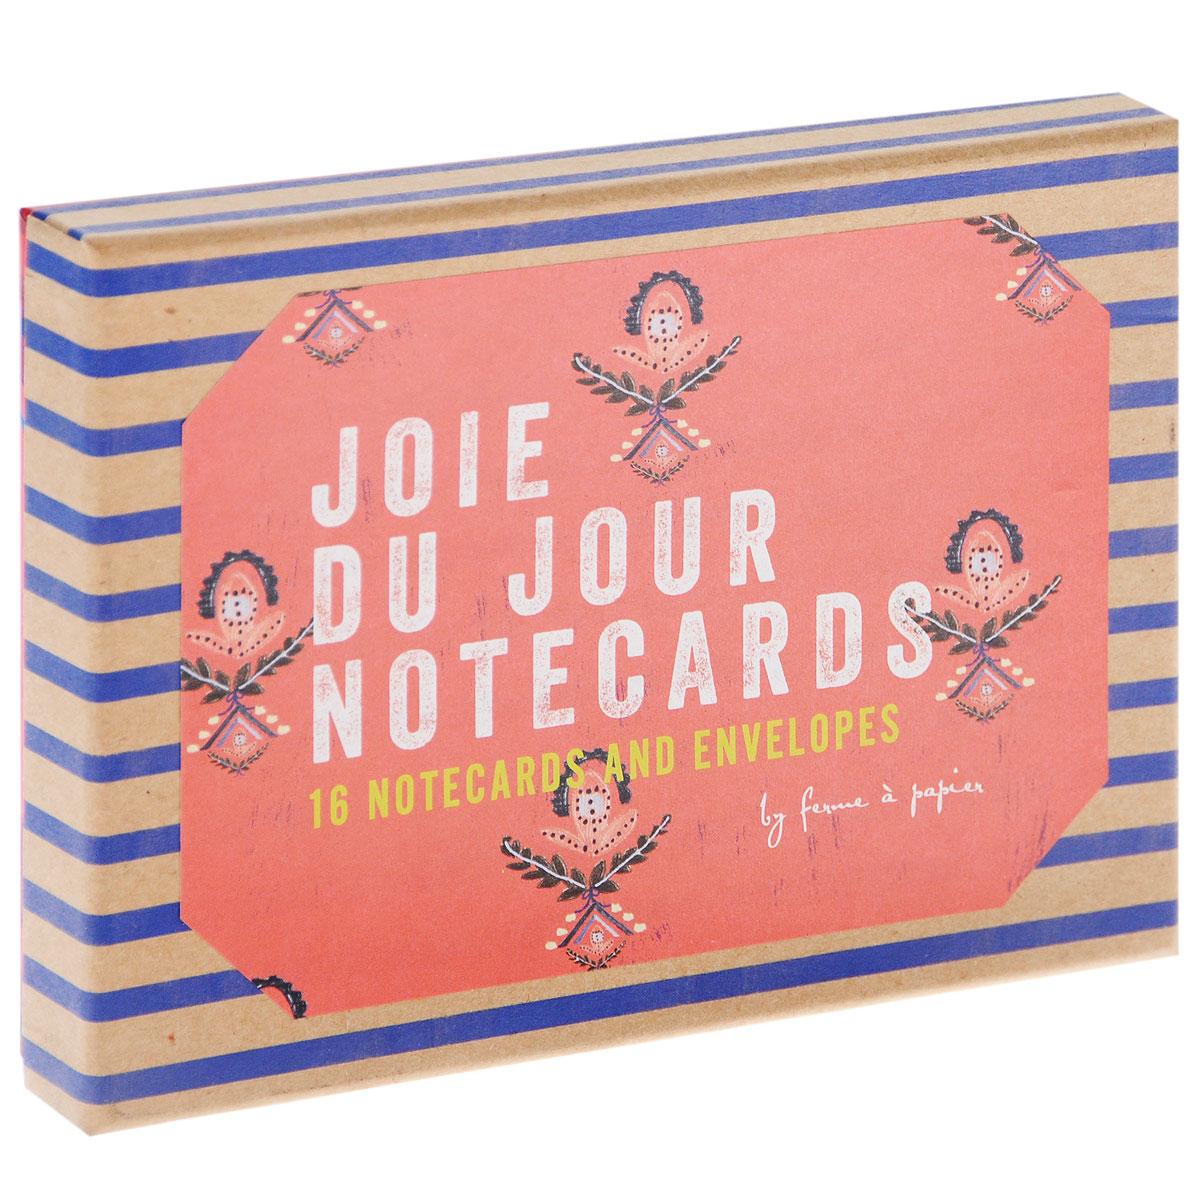 Joie du Jour Notecards: 16 Notecards and Envelopes